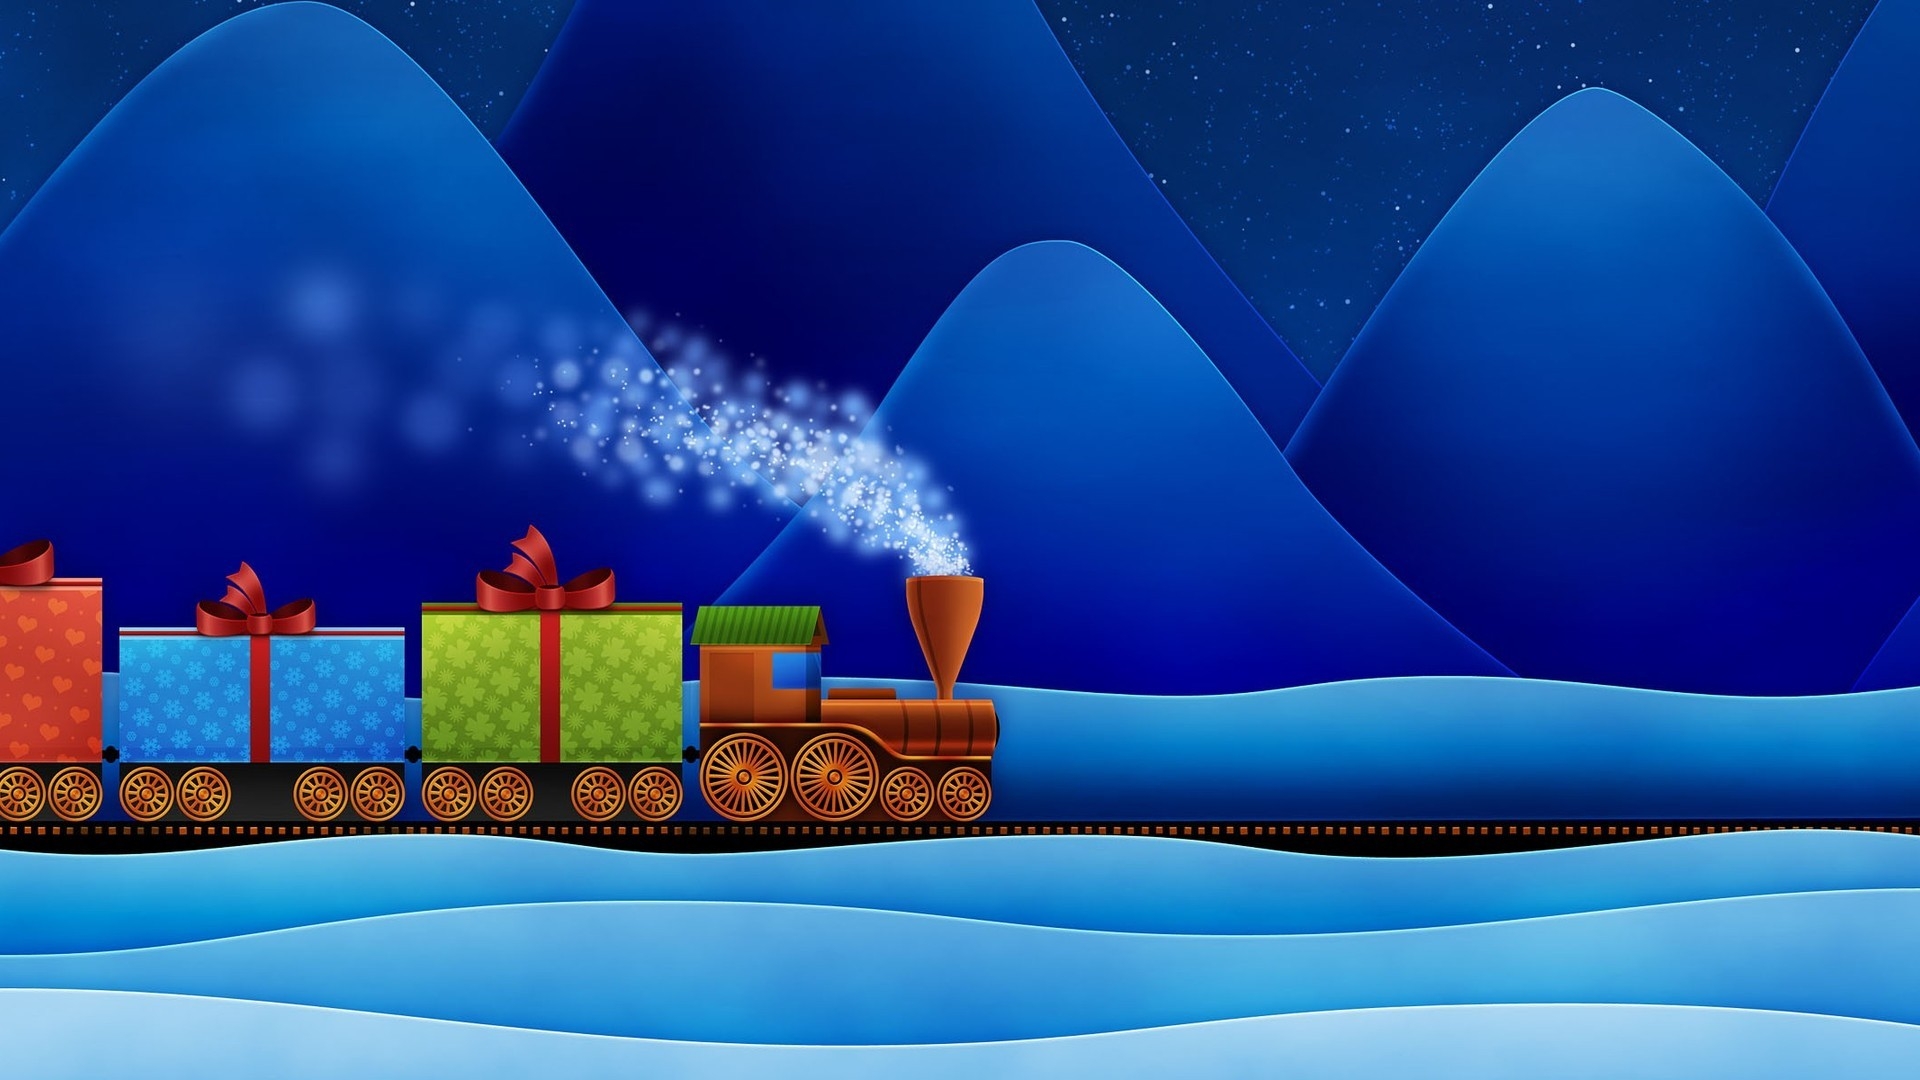 Train with Gifts for 1920 x 1080 HDTV 1080p resolution